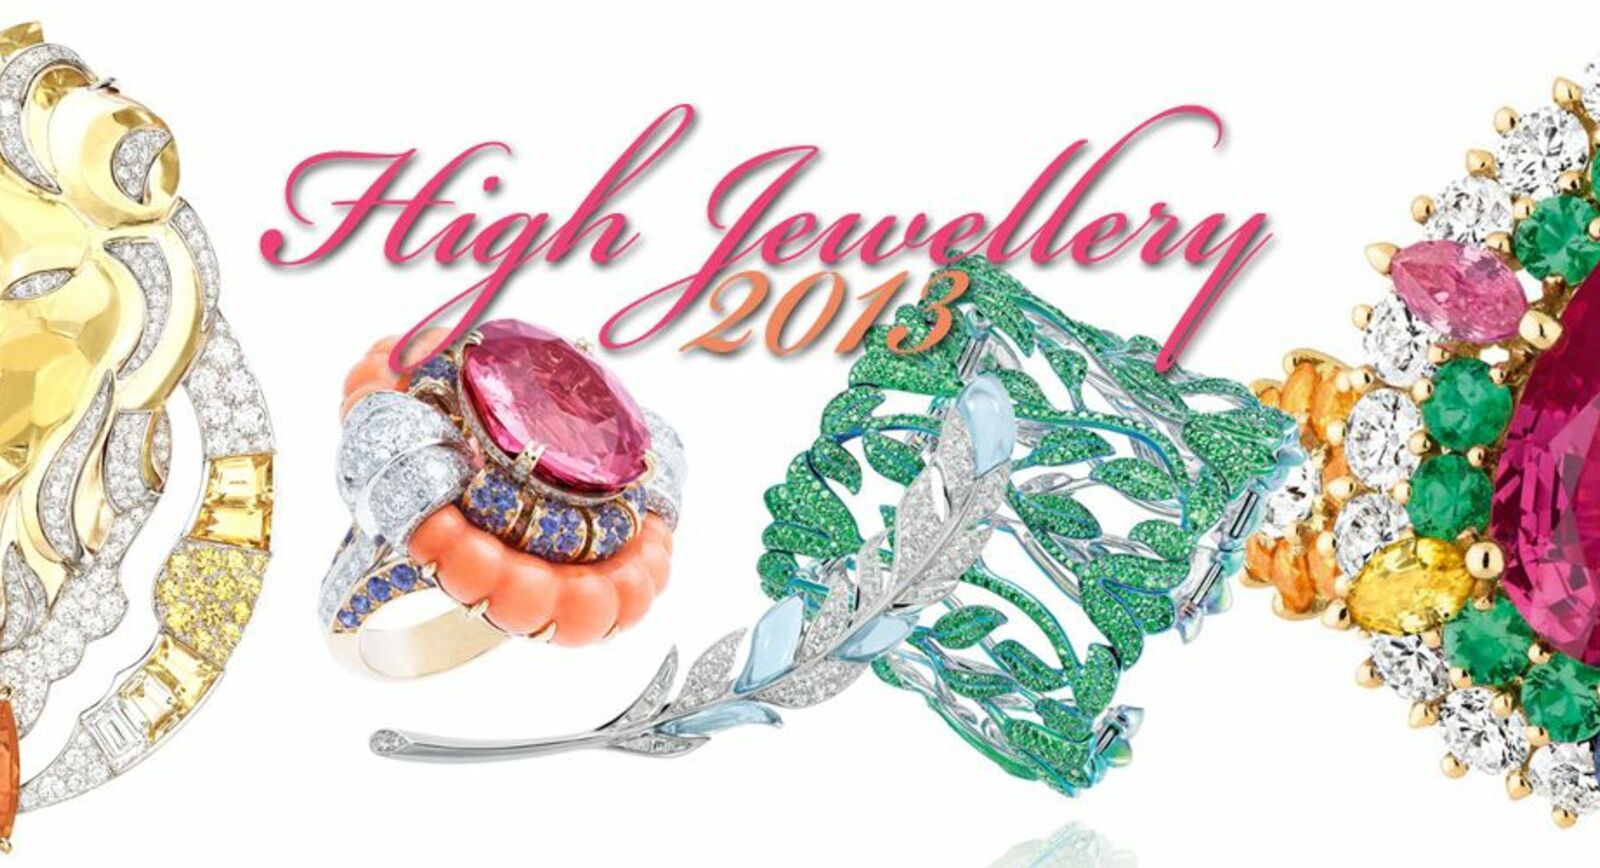 The Premier League: High Jewellery in 2013, part 2Dior Joaillerie